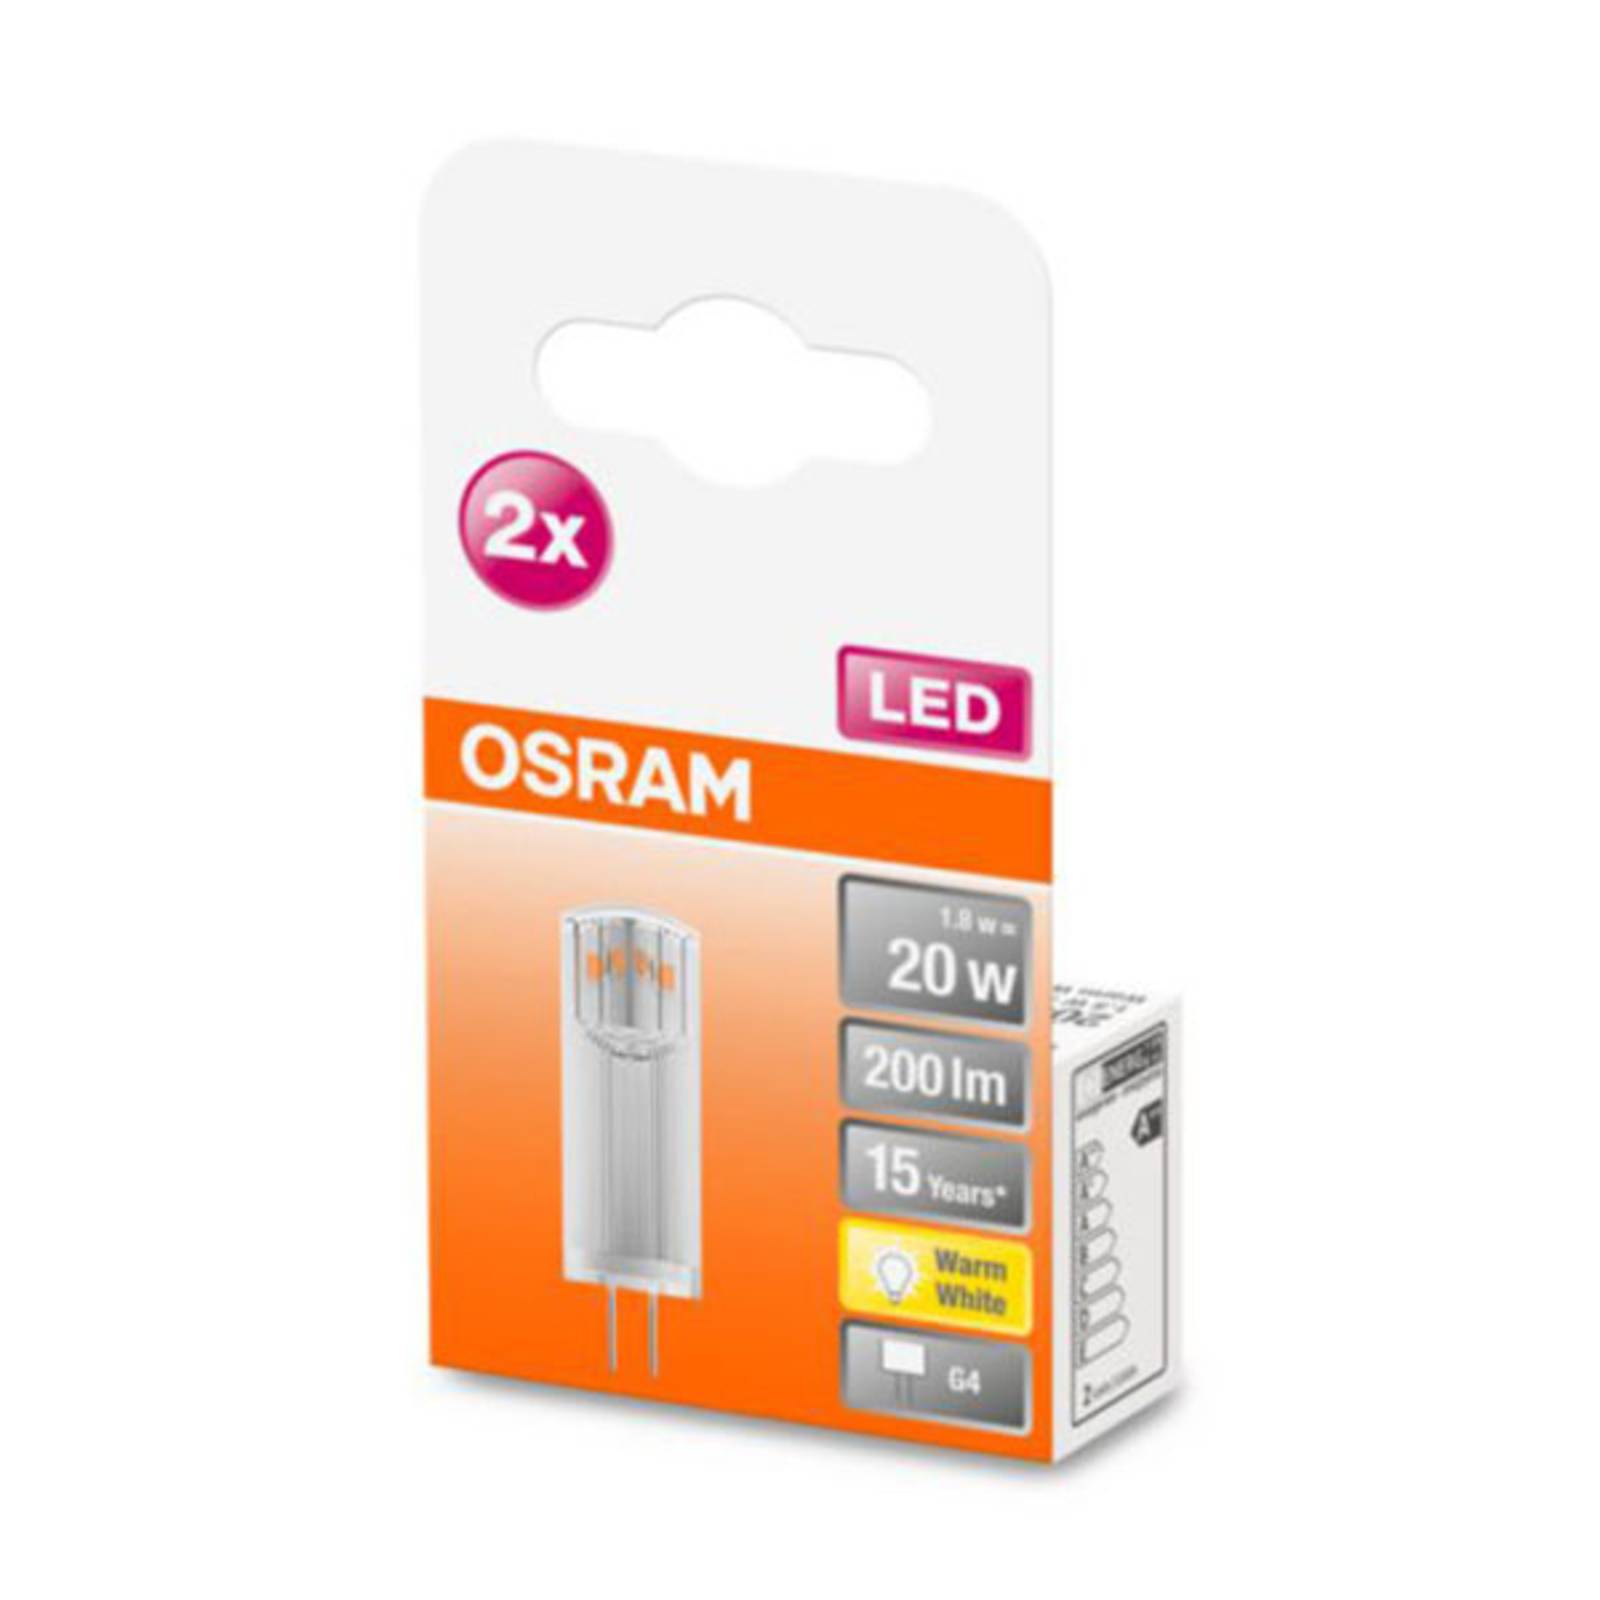 Image of OSRAM 2 ampoules broche LED G4 1,8W 2 700K transp 4058075449800